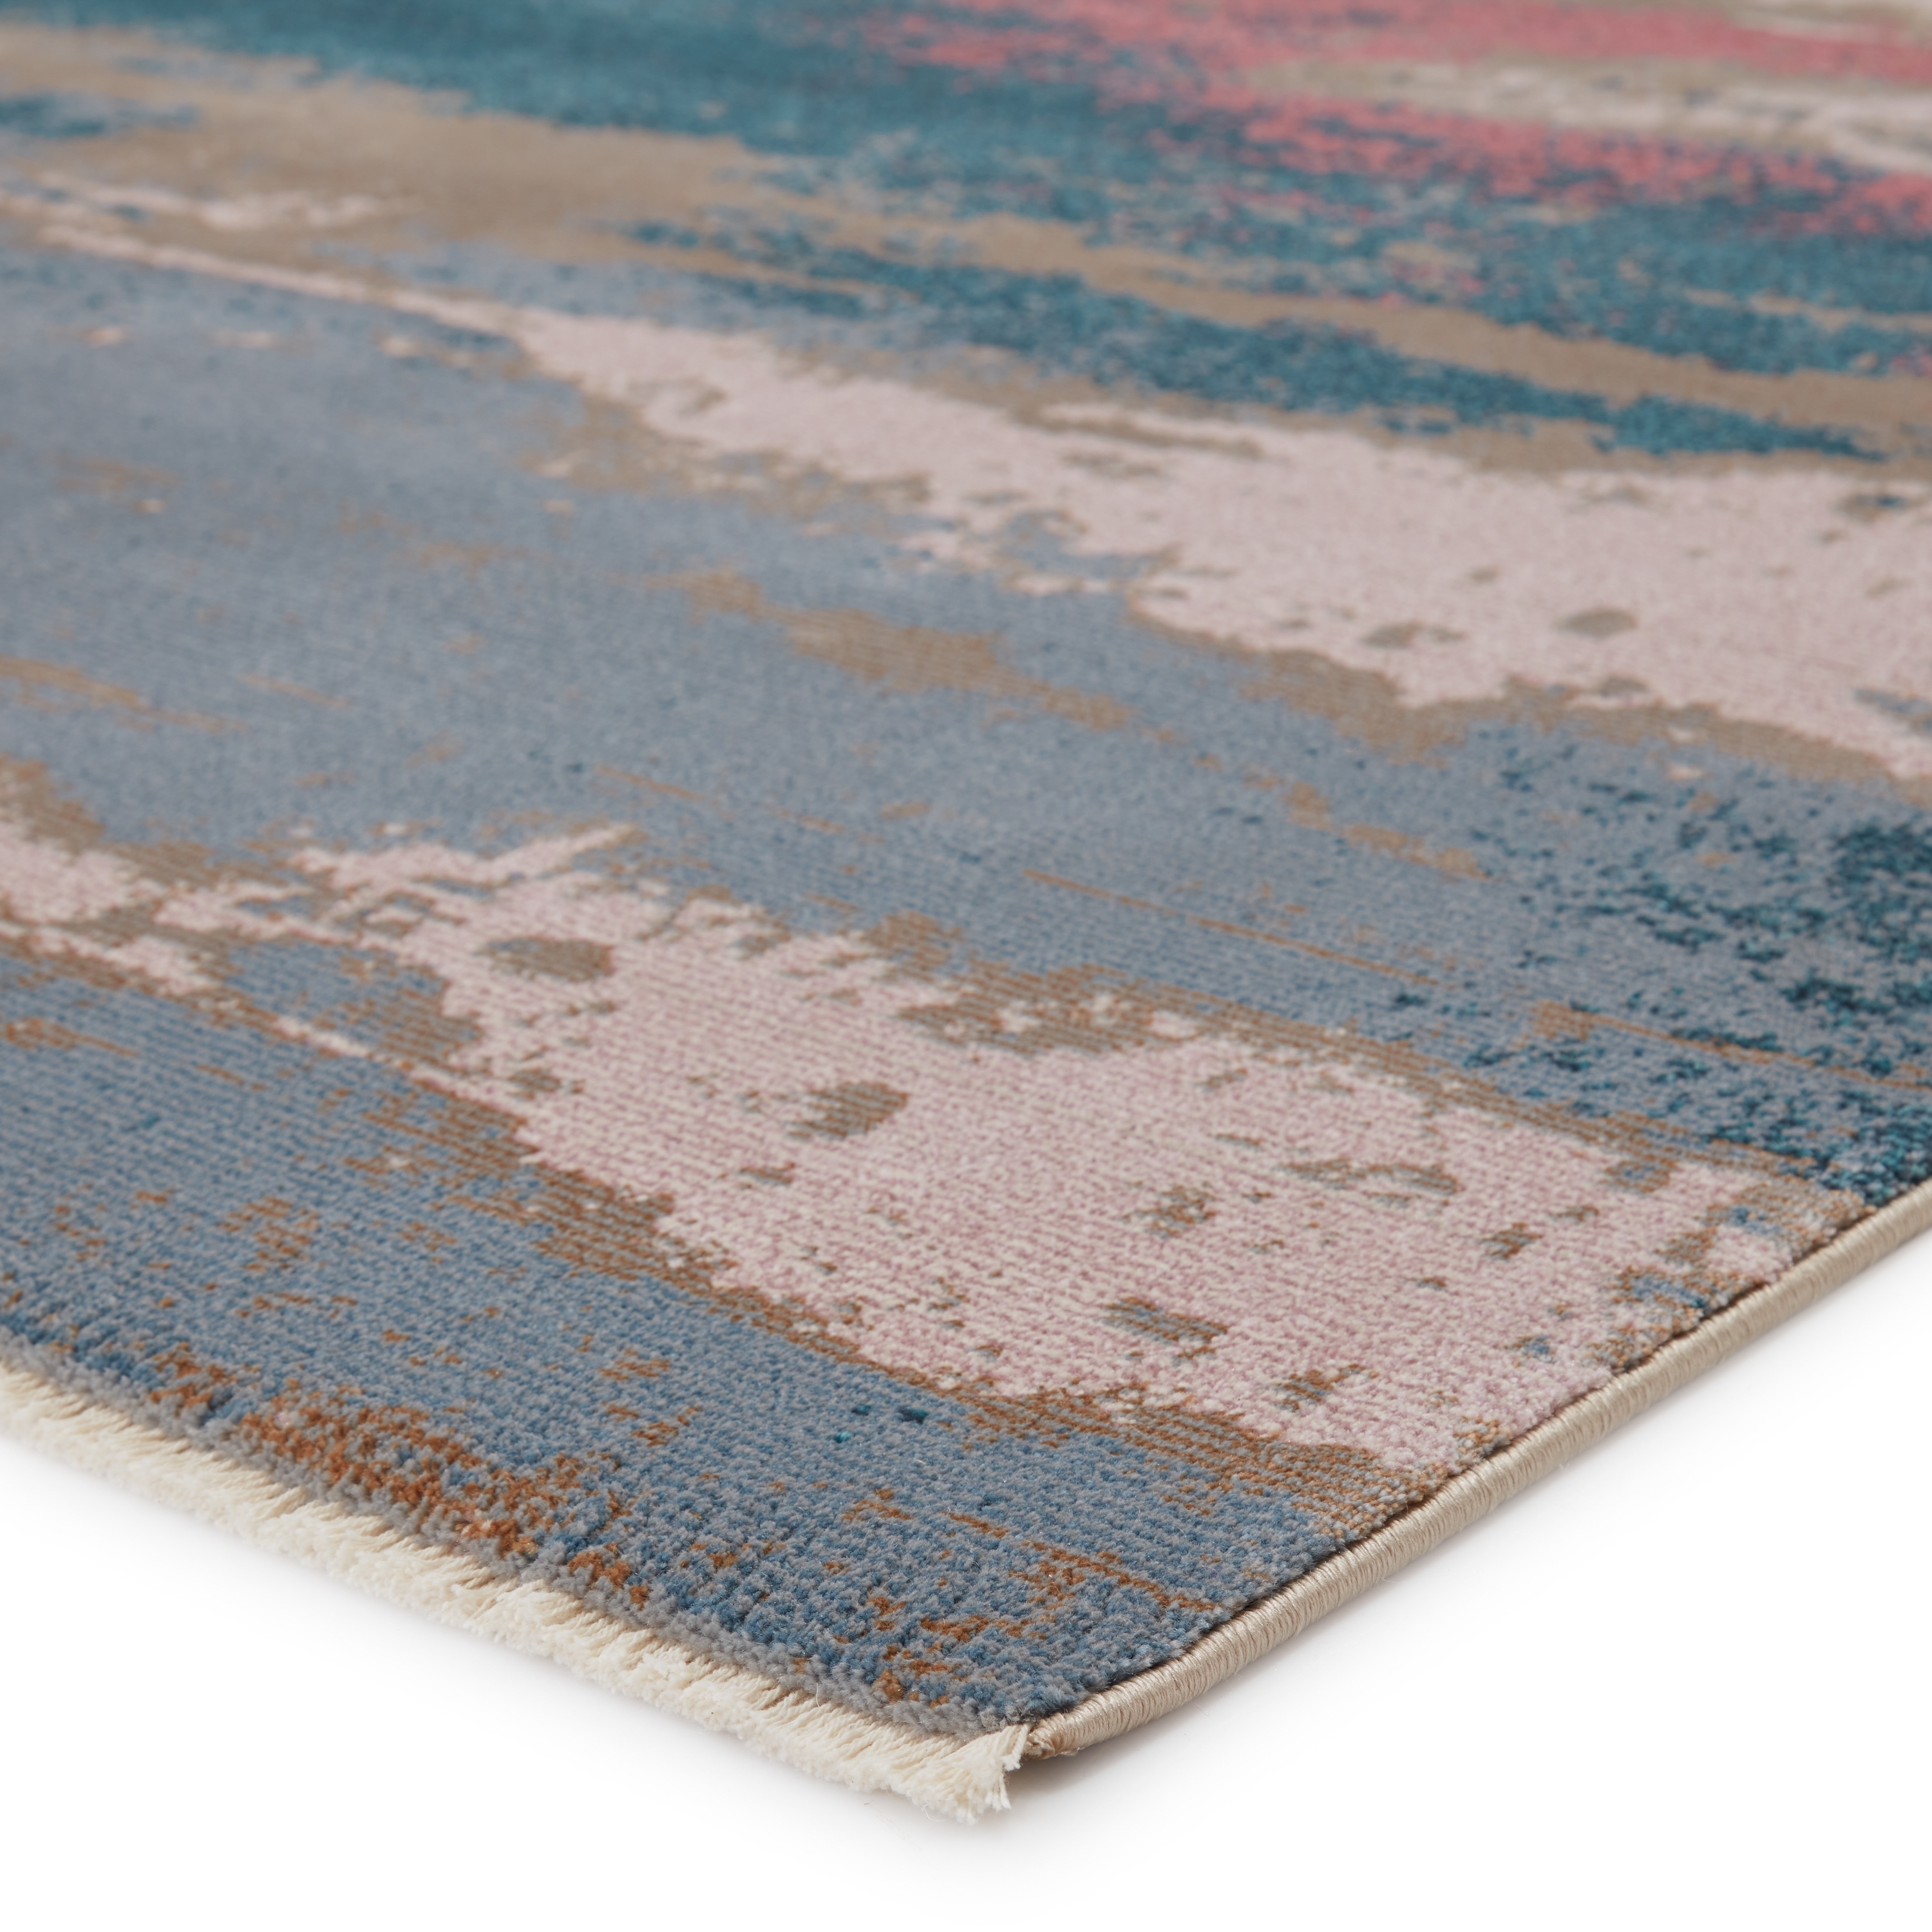 Vibe by Helene Abstract Multicolor Area Rug (5'X7'6") - Image 1